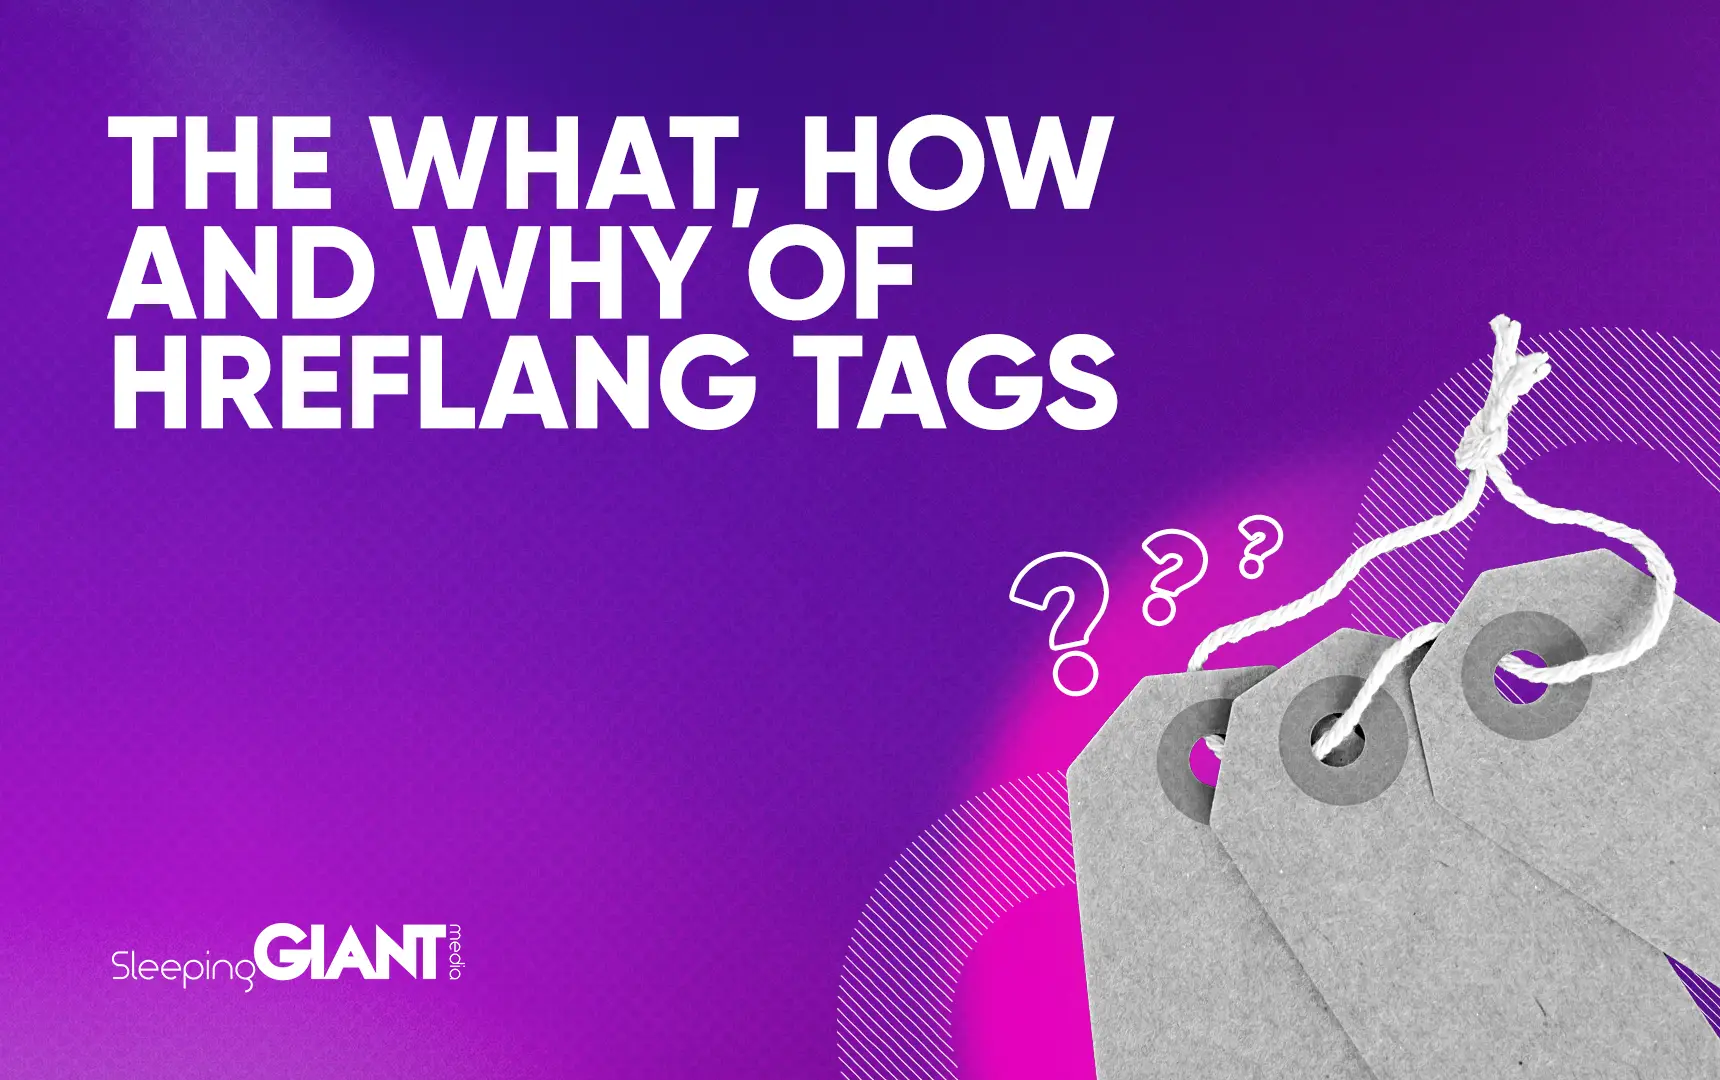 The what and how about hreflang tags.